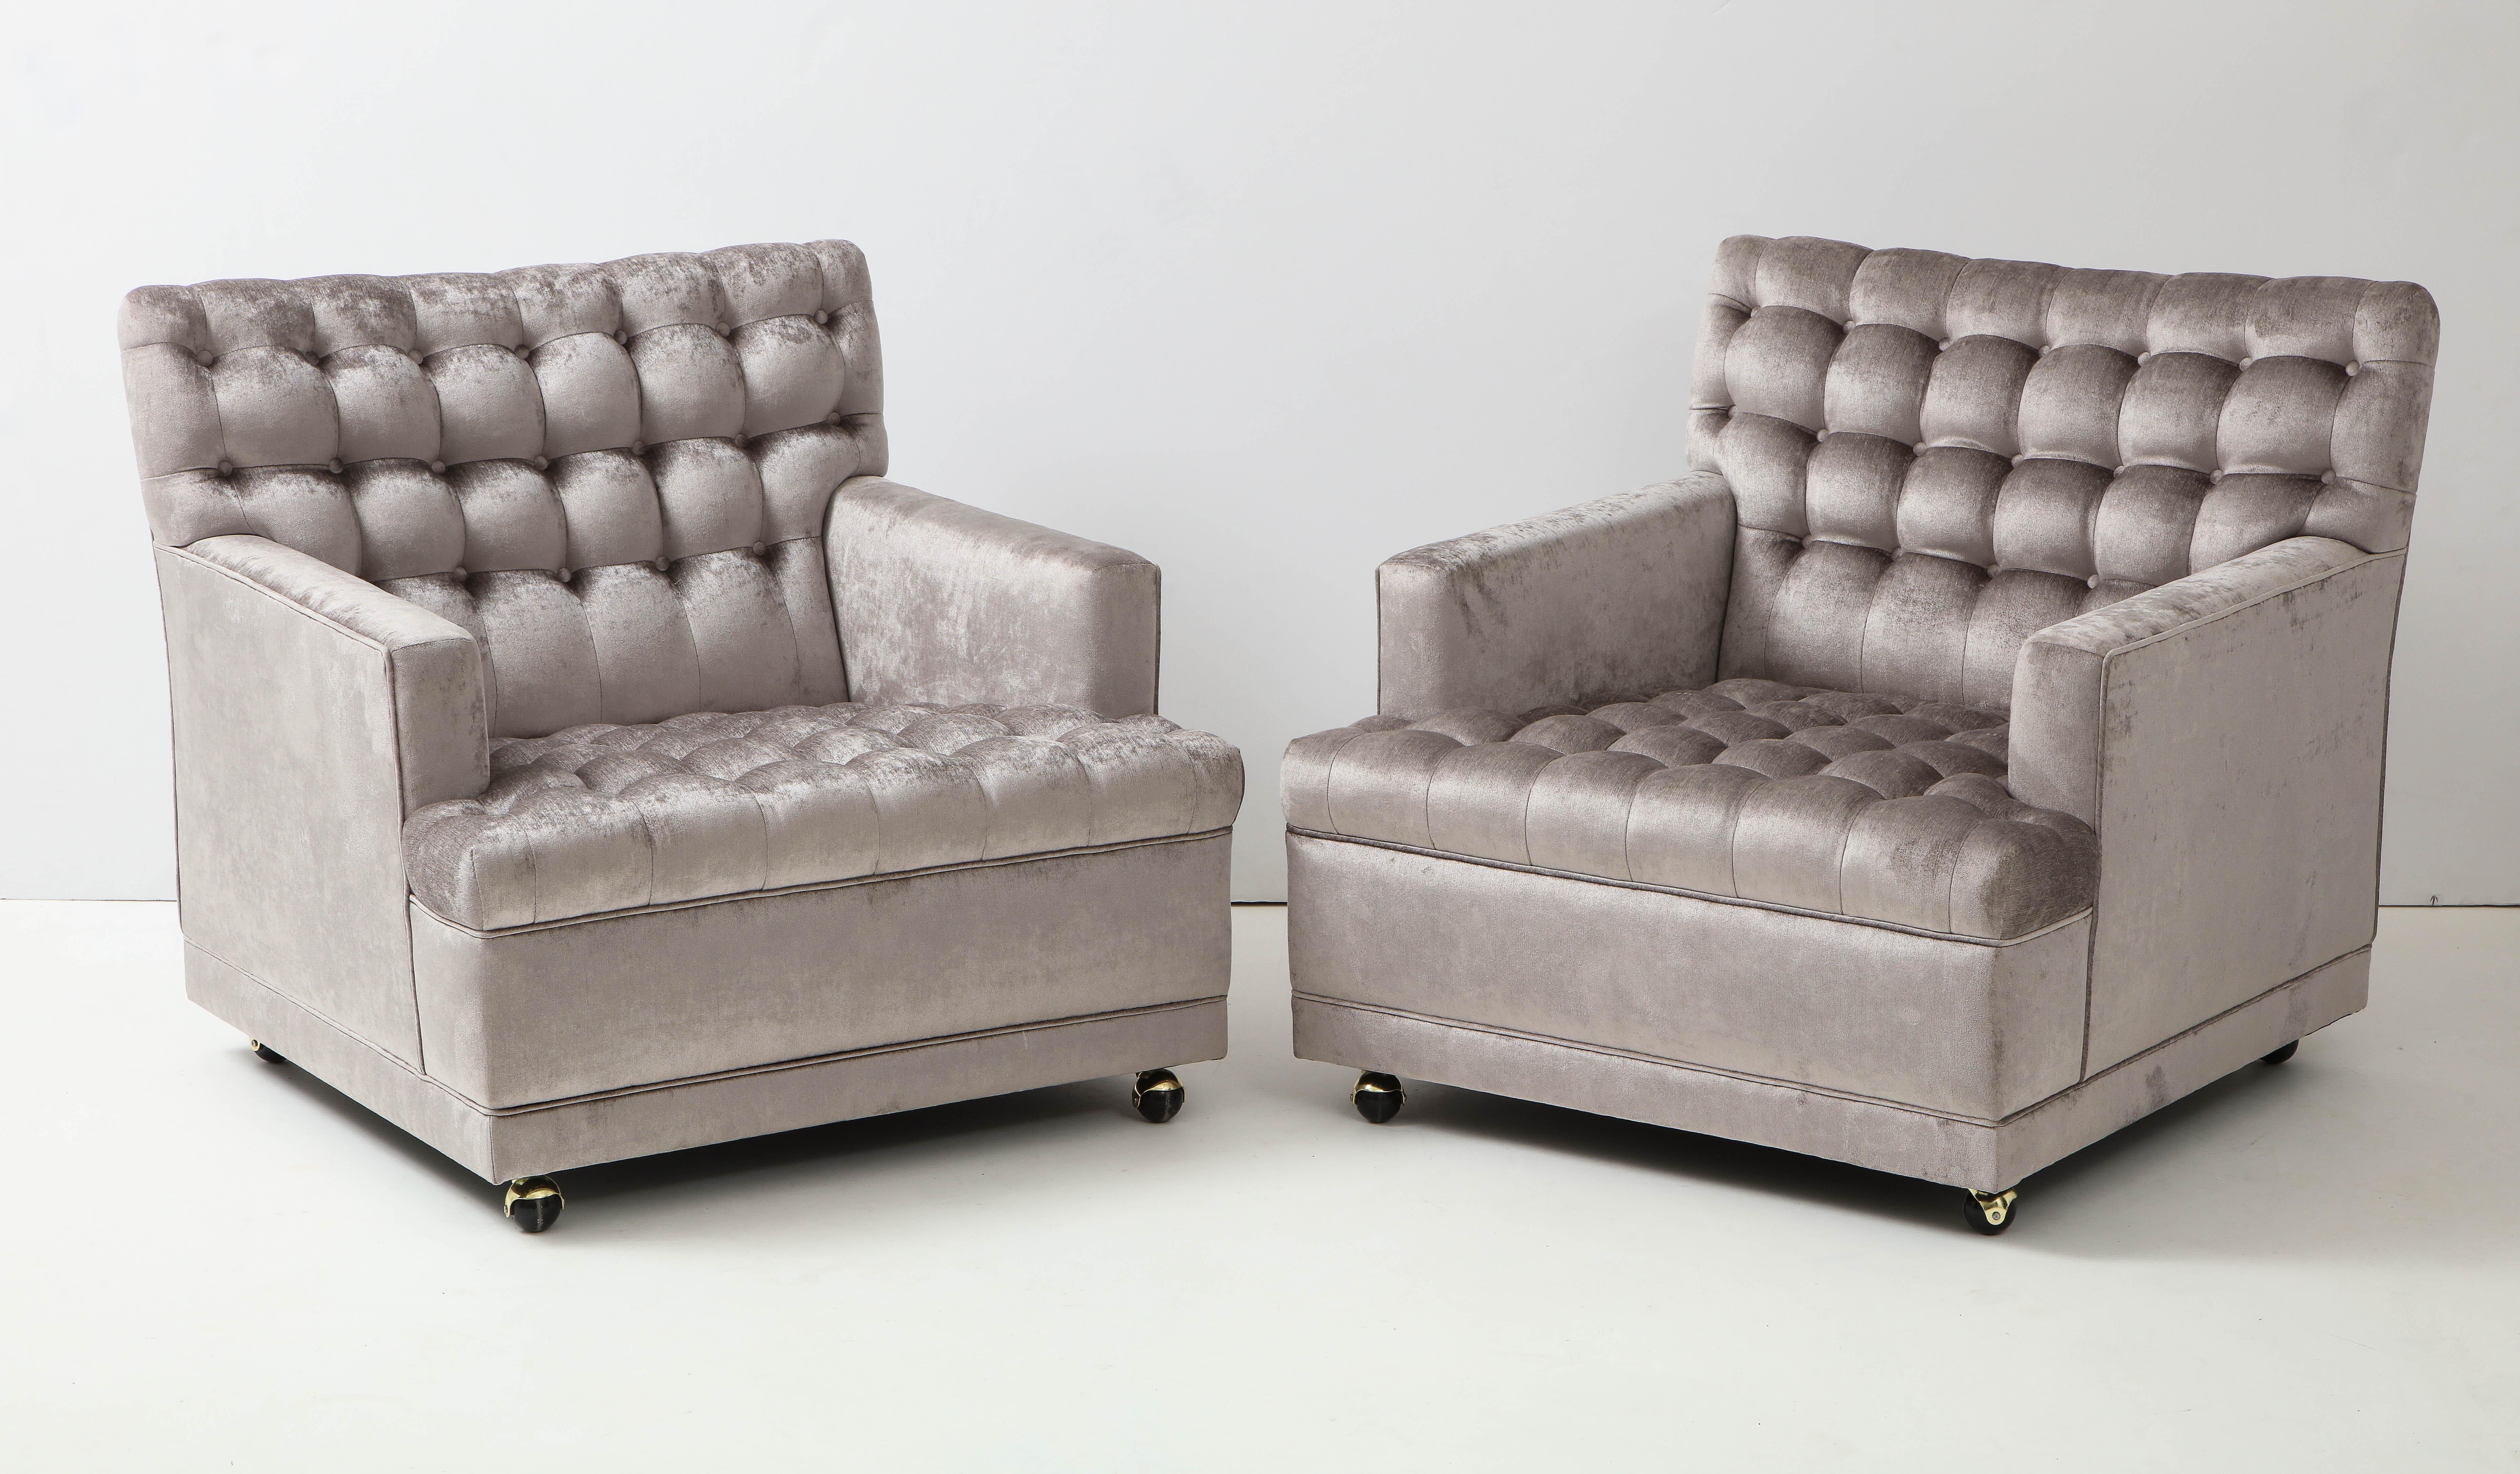 Stunning pair of club chairs .
The chairs have been beautifully reupholstered with a biscuit tufted seat and back in a luxurious silk velvet fabric. 
The chairs are on casters and they each have a separate accent pillow.